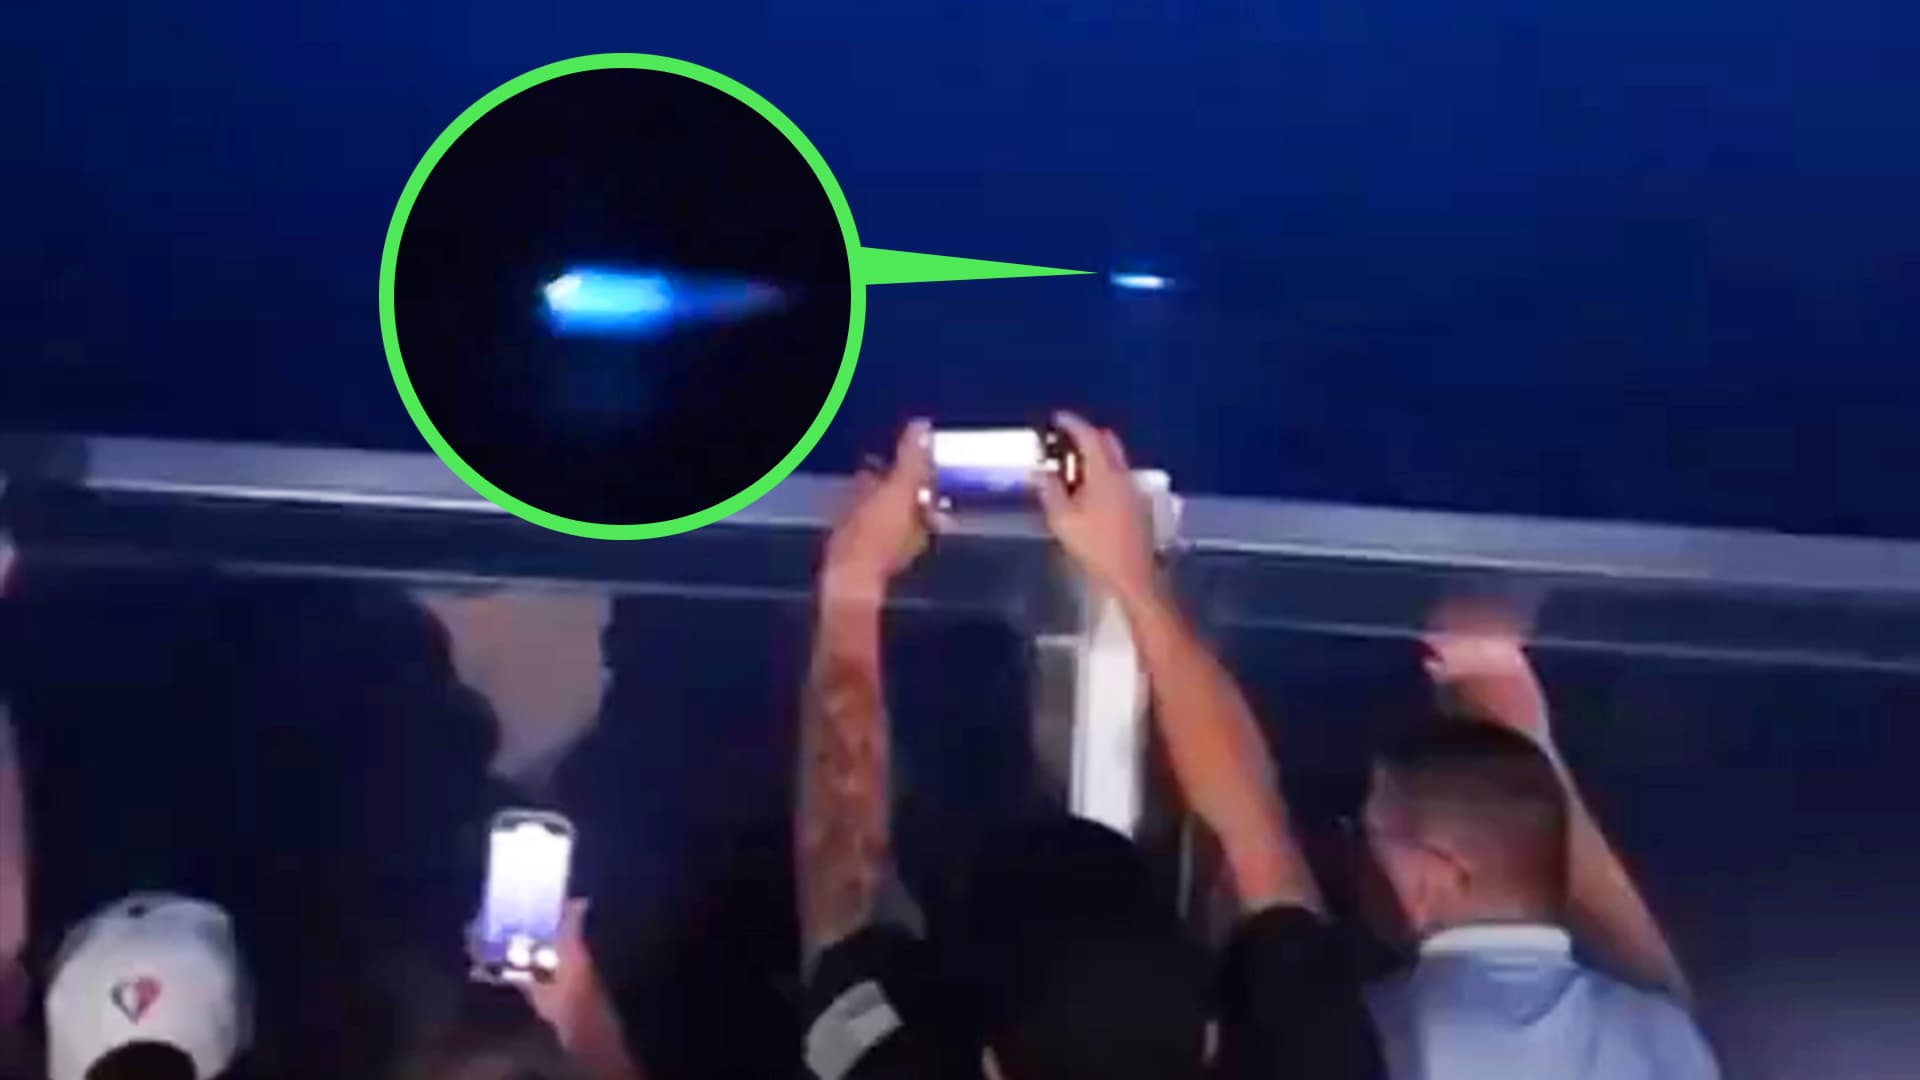 Passengers observing mysterious blue lights at sea